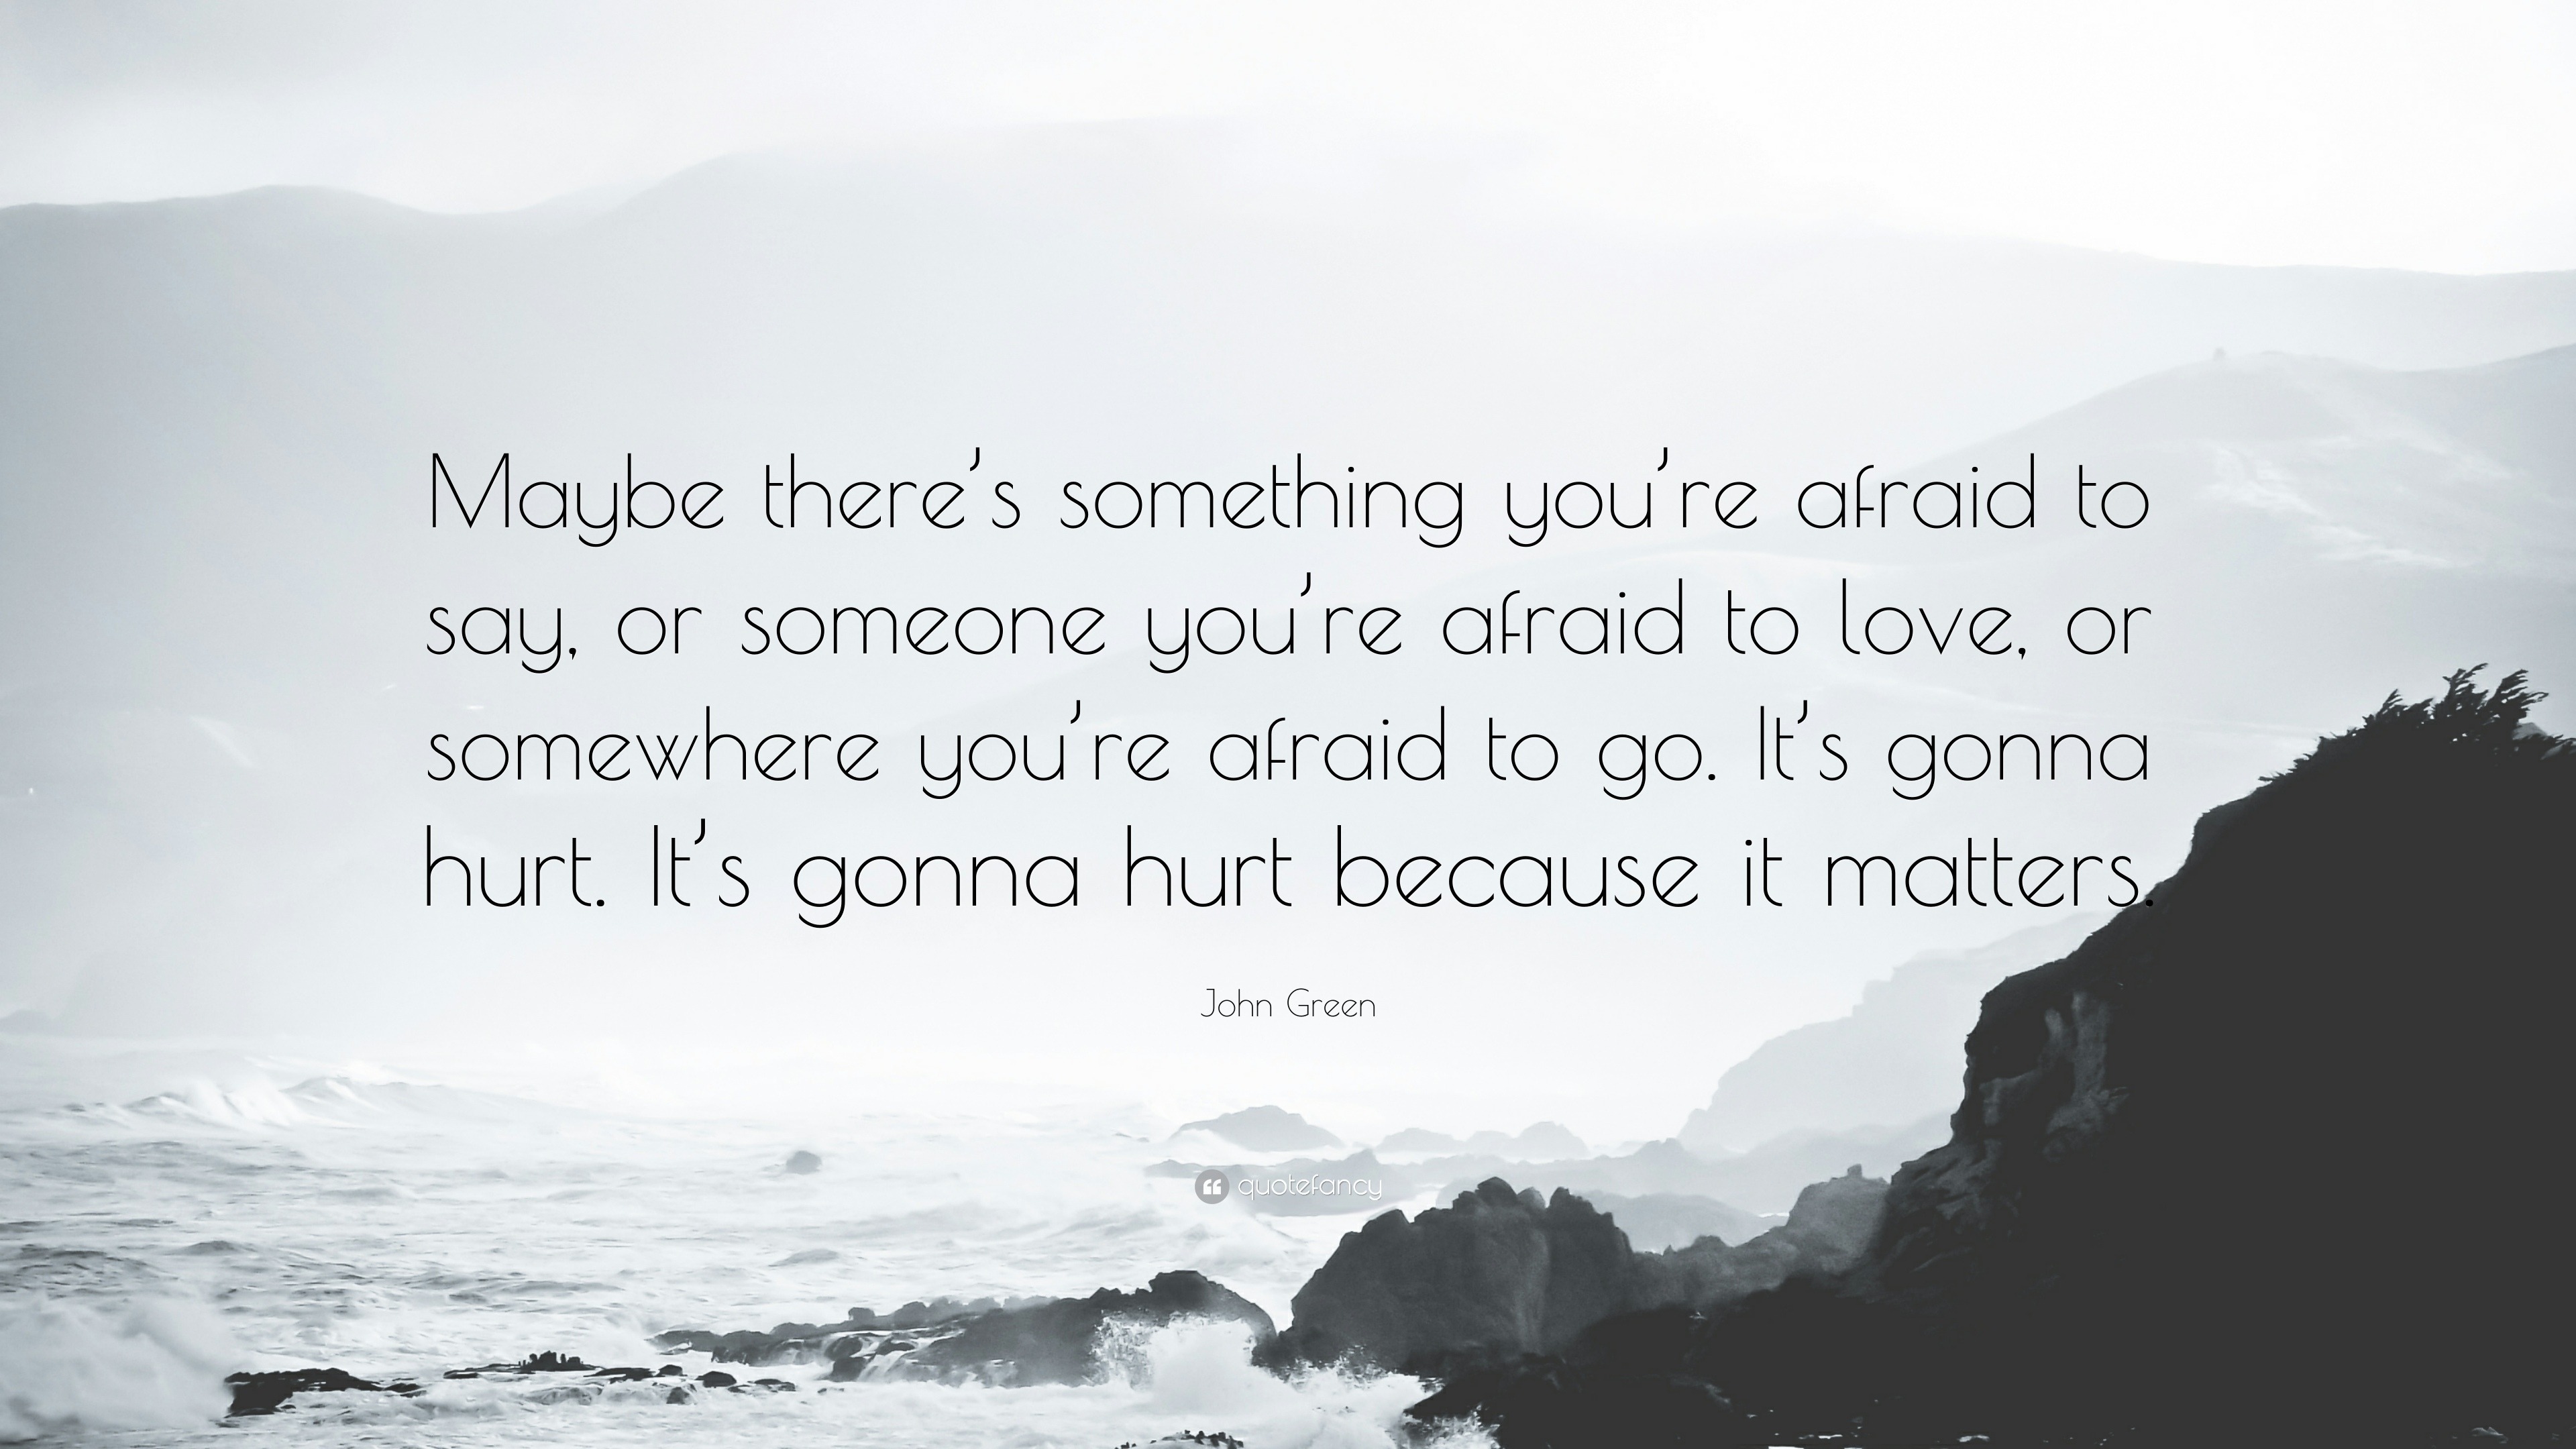 John Green Quote “Maybe there s something you re afraid to say or